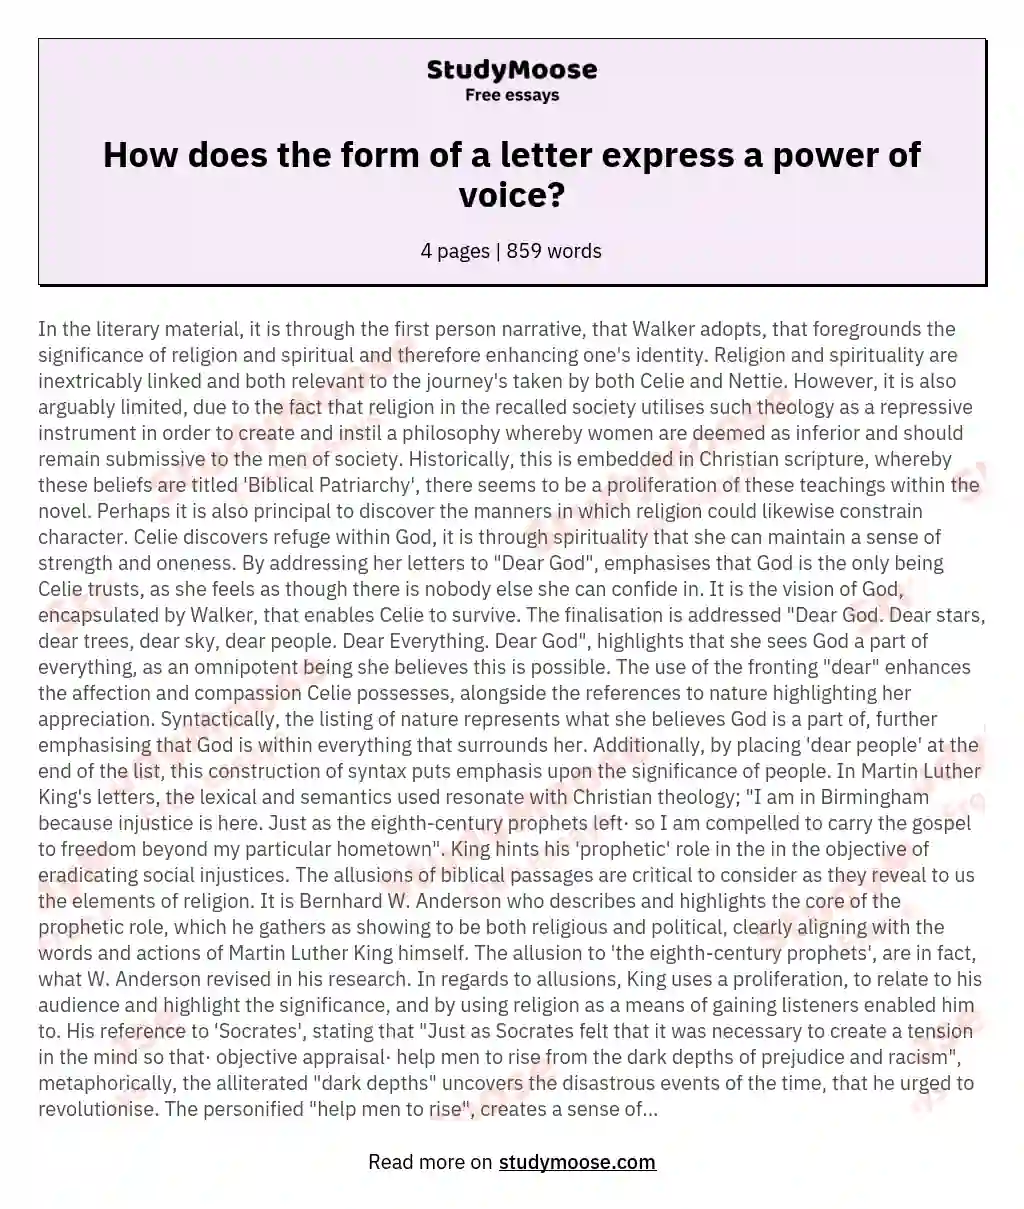 How does the form of a letter express a power of voice? essay